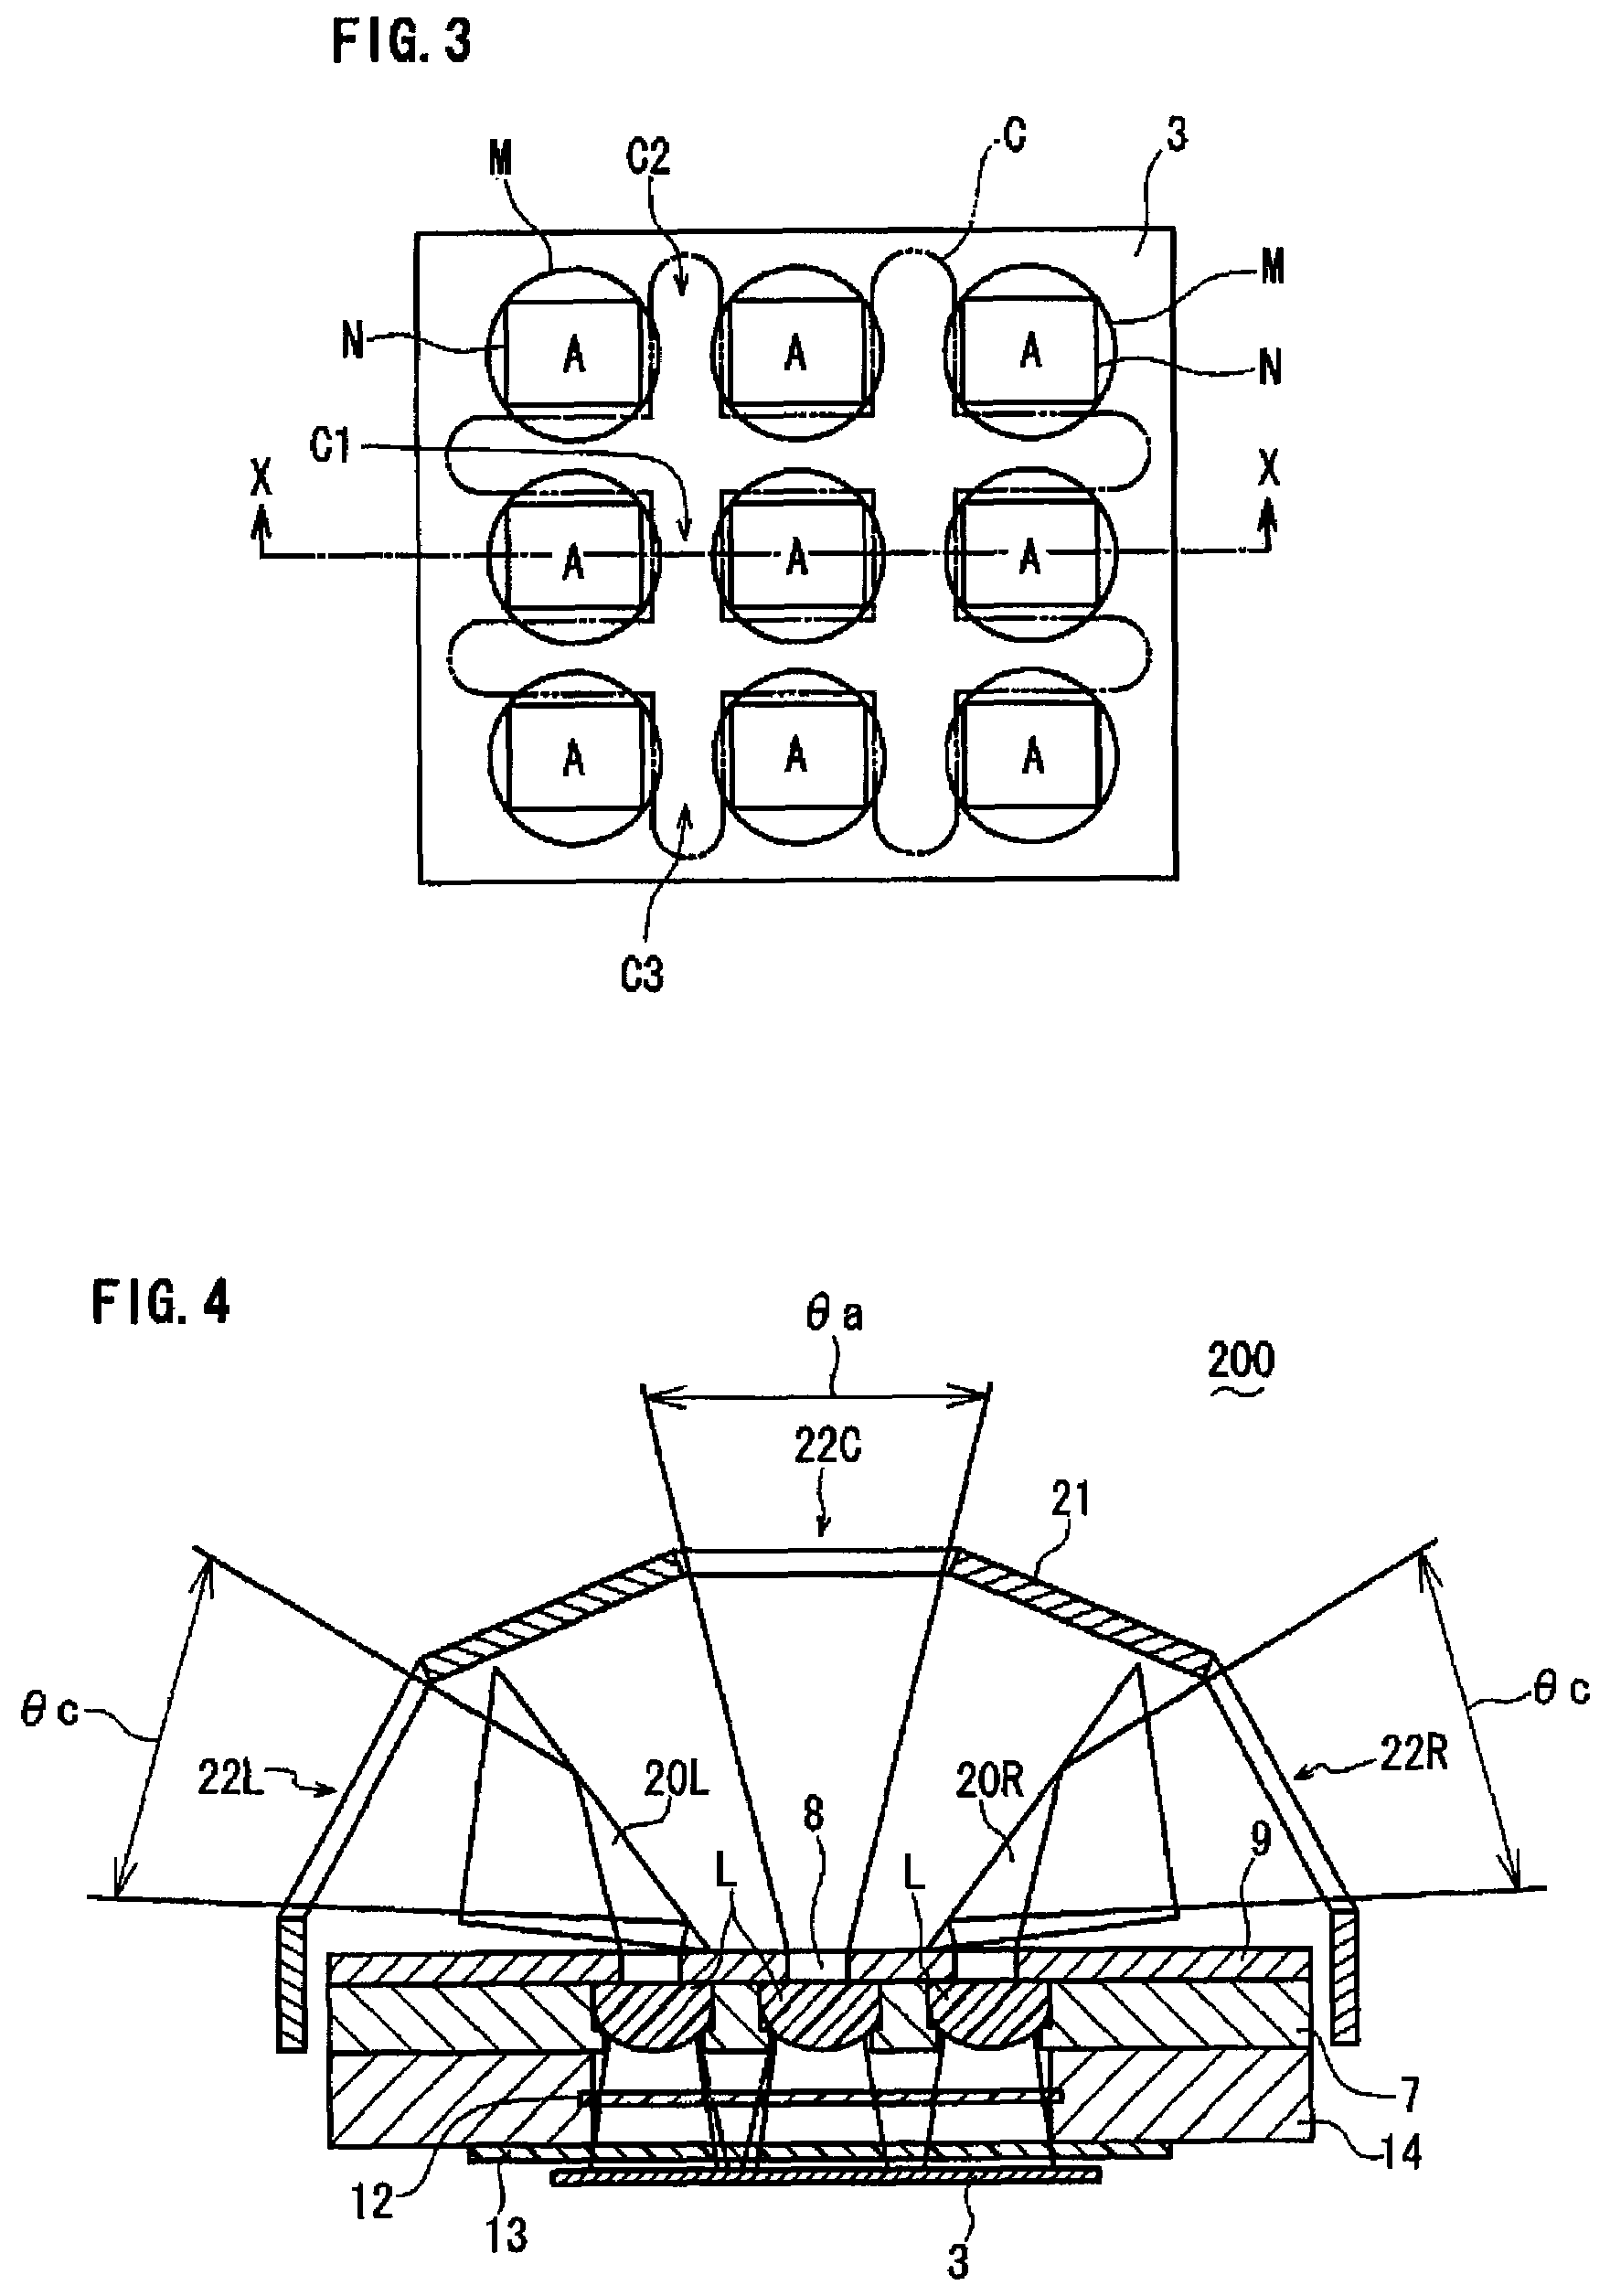 Compound-eye imaging device